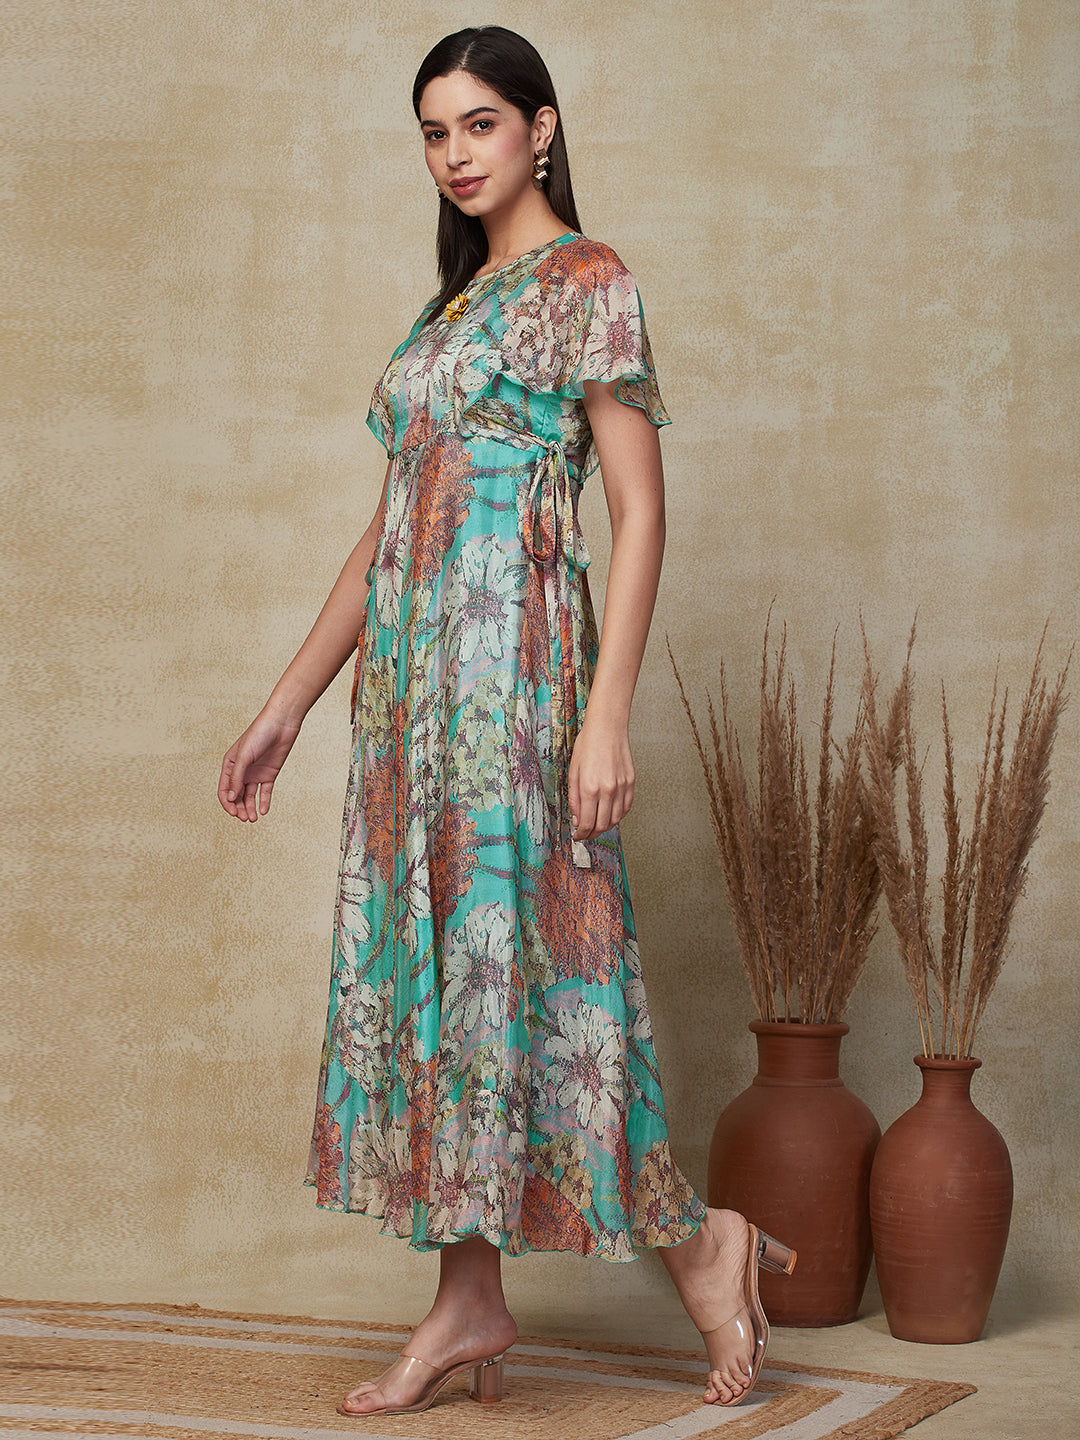 Abstract Floral Printed A-Line Fit & Flare Maxi Dress - Turquoise Blue